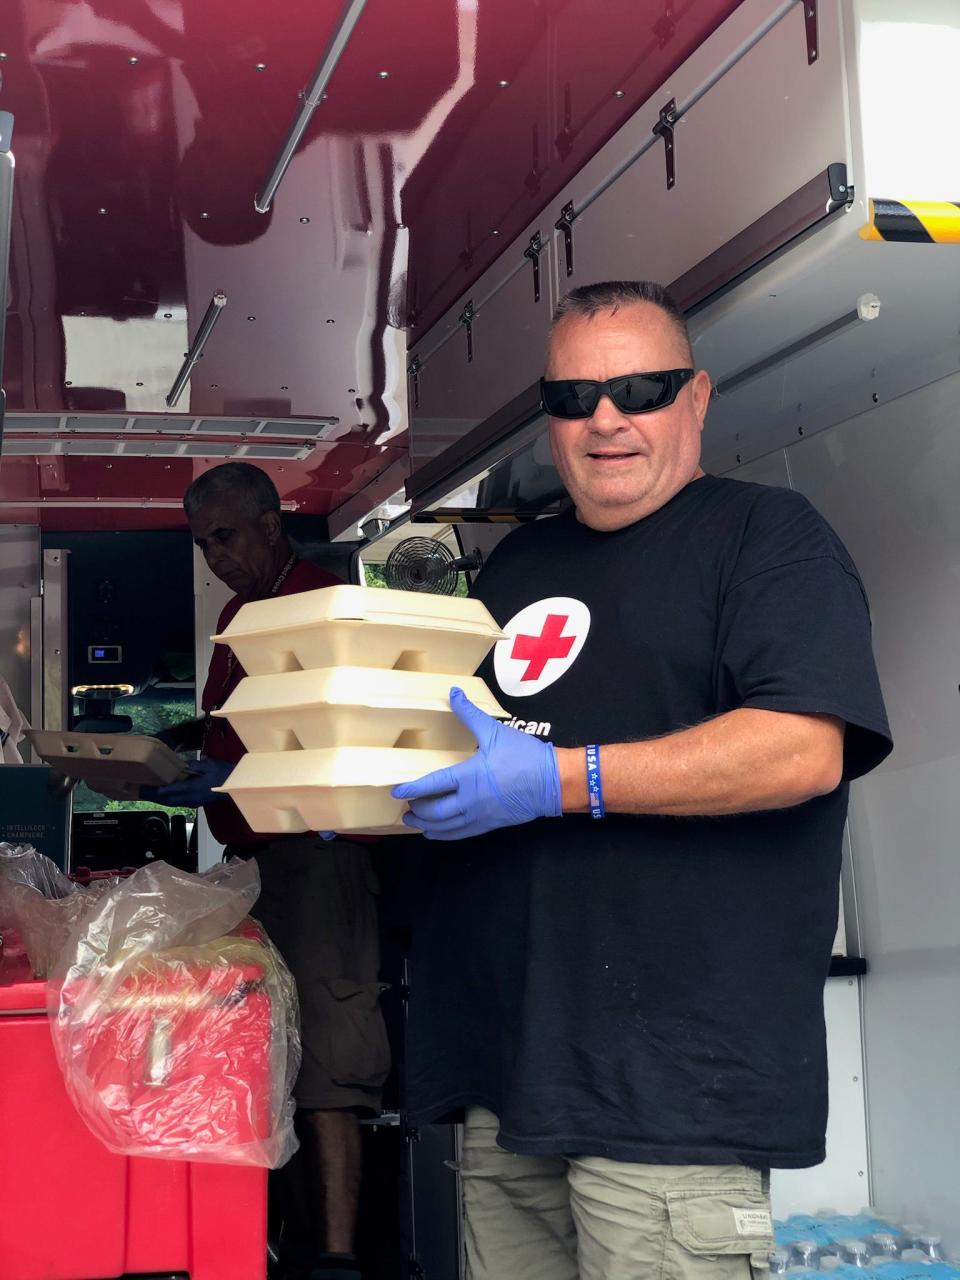 Byron Ek, of the Florida Gulf Coast to Heartland Chapter of the American Red Cross, packed up more than a week ago and left for Kentucky as a volunteer, not knowing what to expect.